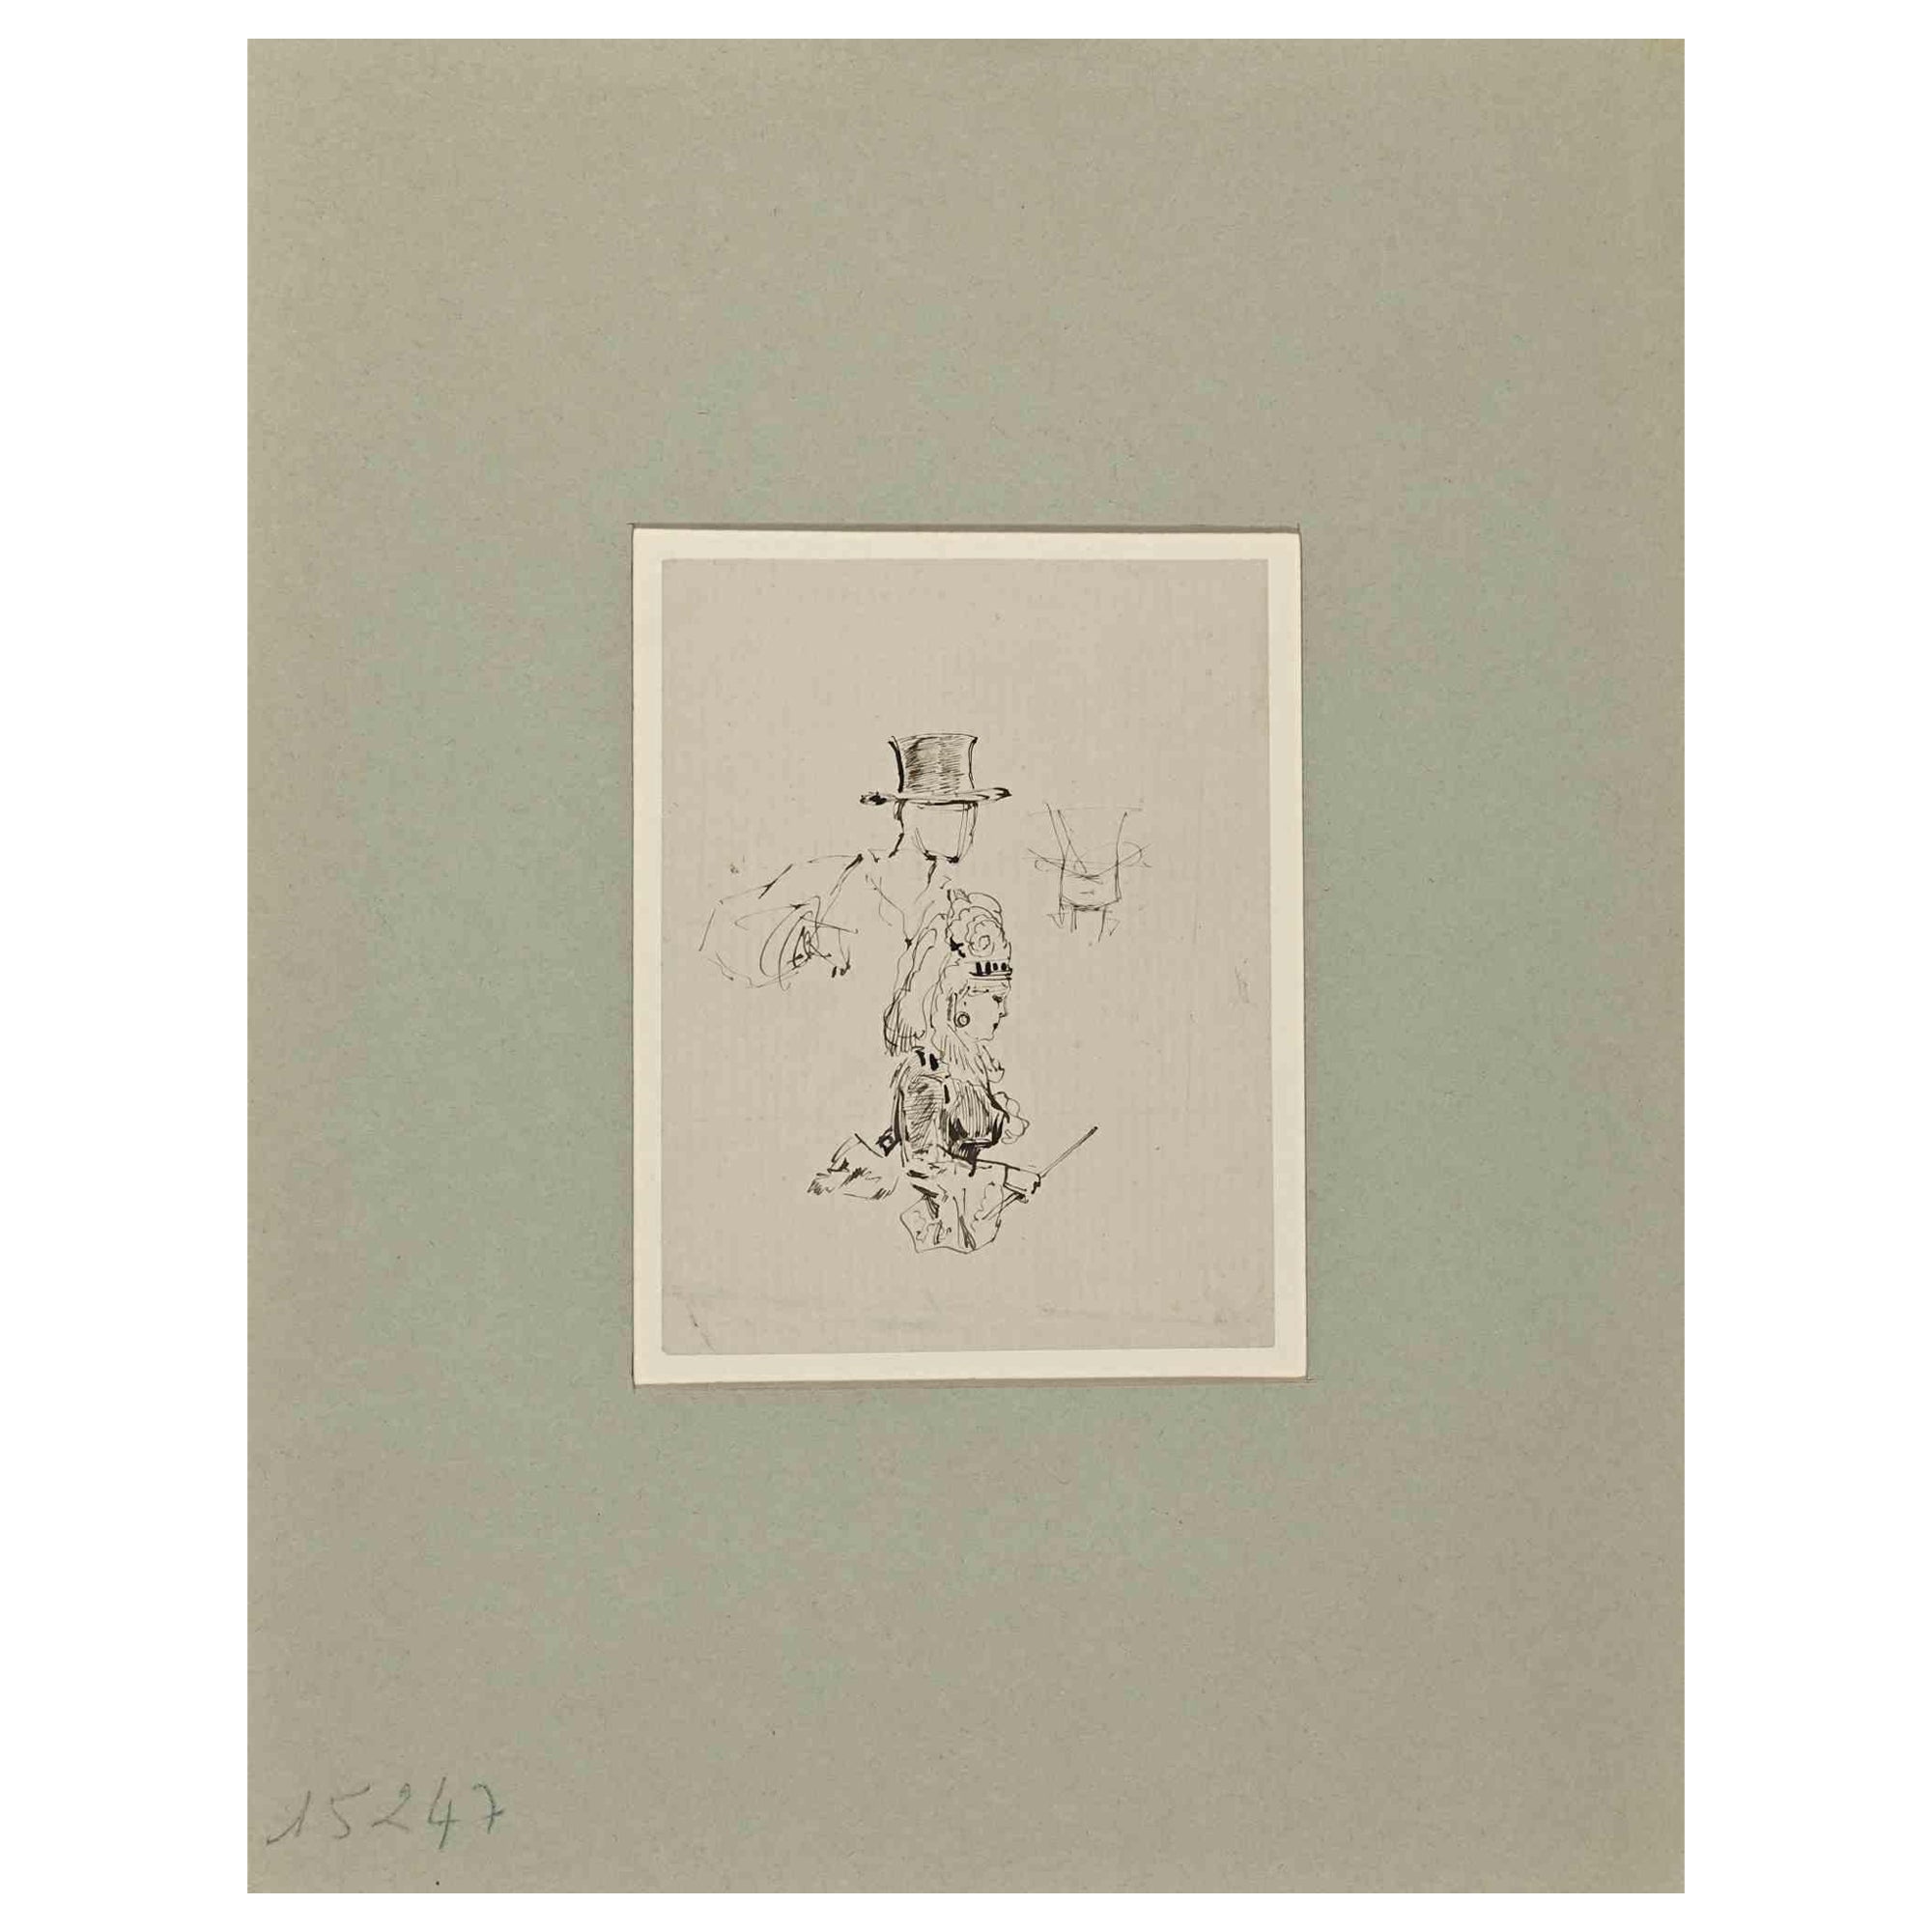 Henry Somm Figurative Art - Figures - Drawing on Paper by H. Somm - Late 19th Century